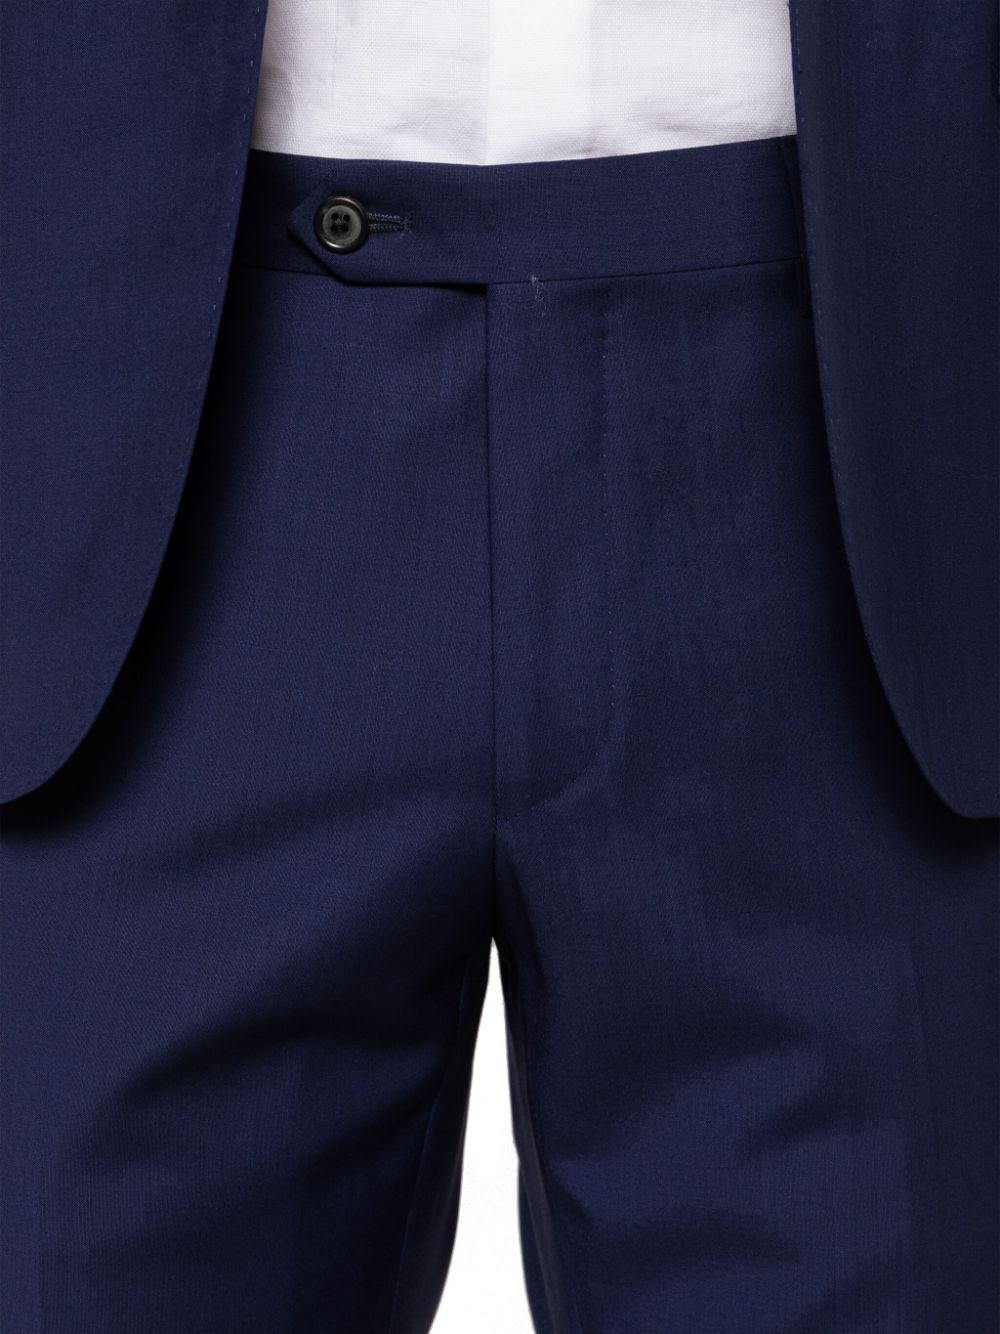 China blue single-breasted suit